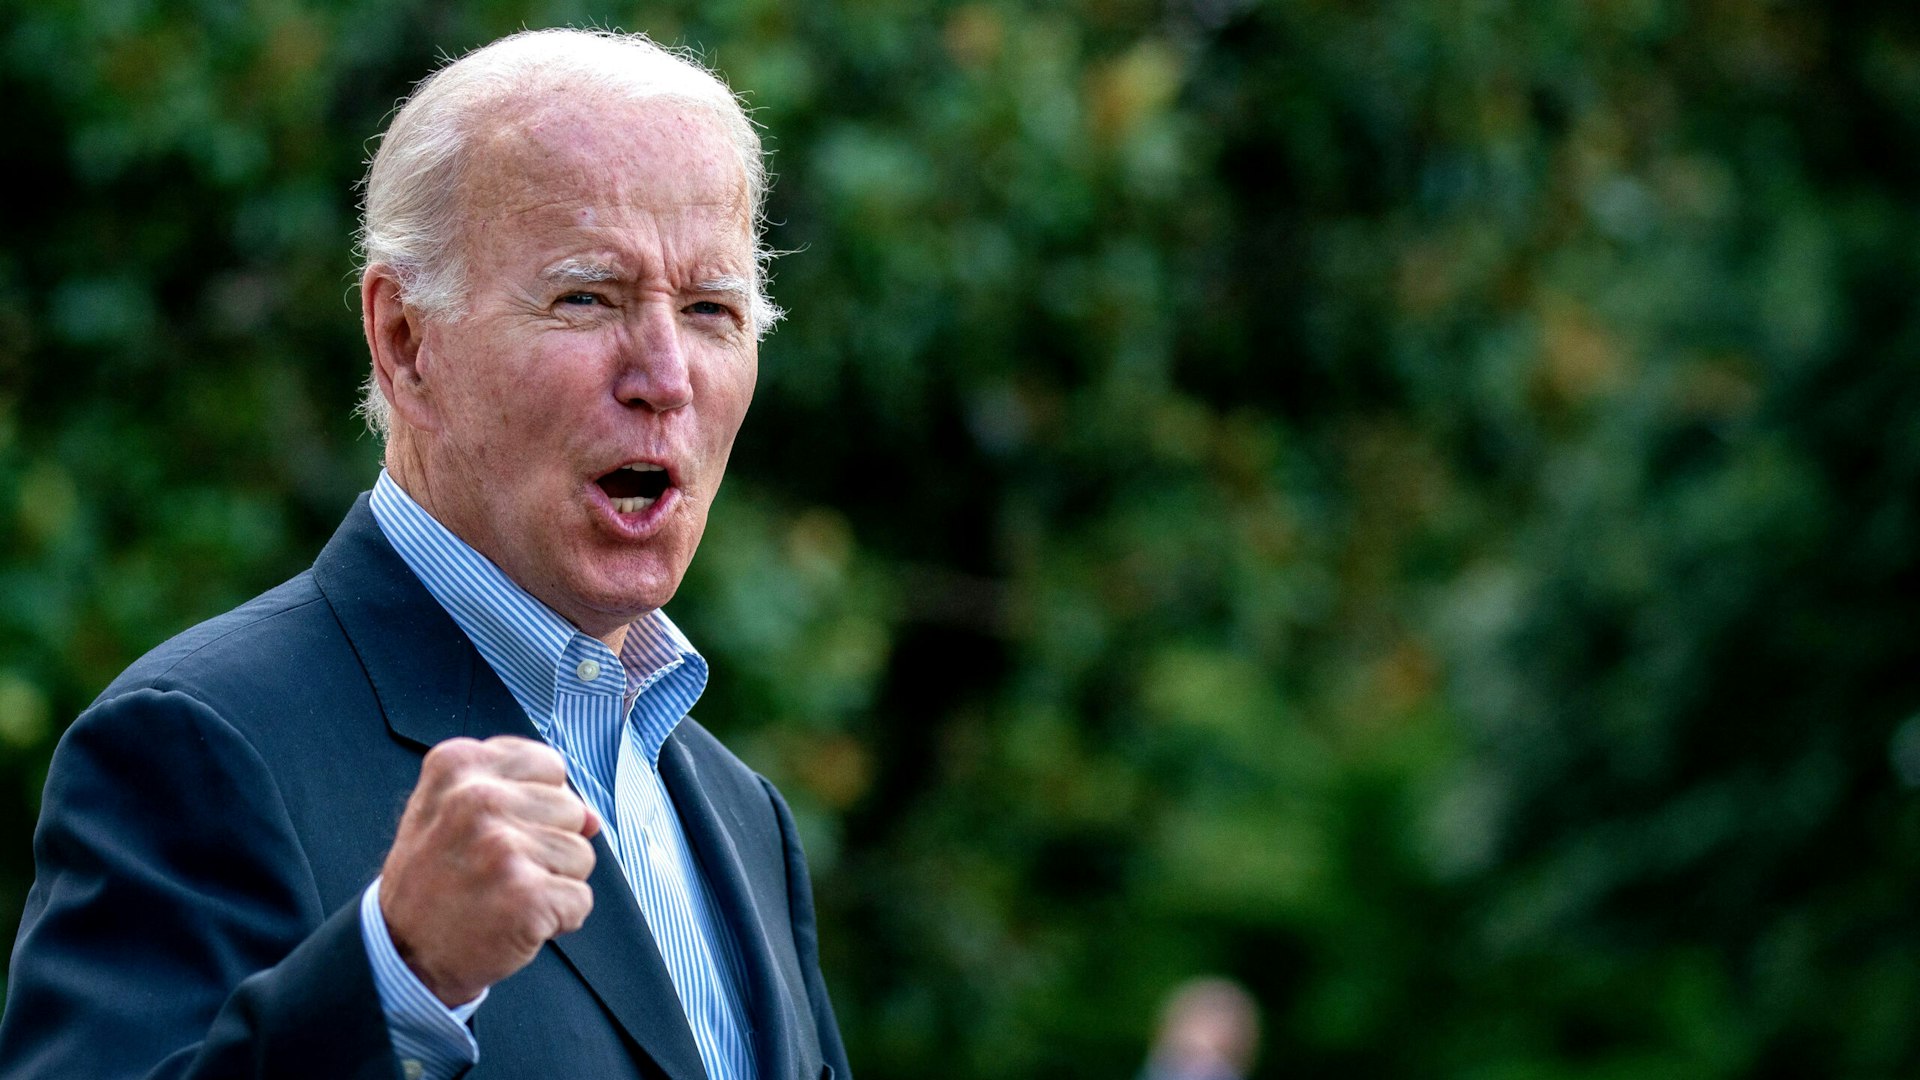 TOPSHOT - US President Joe Biden answers a shouted question from a reporter while walking to Marine One on the South Lawn of the White House in Washington, DC, on August 7, 2022, as he travels to Rehoboth Beach, Delaware.